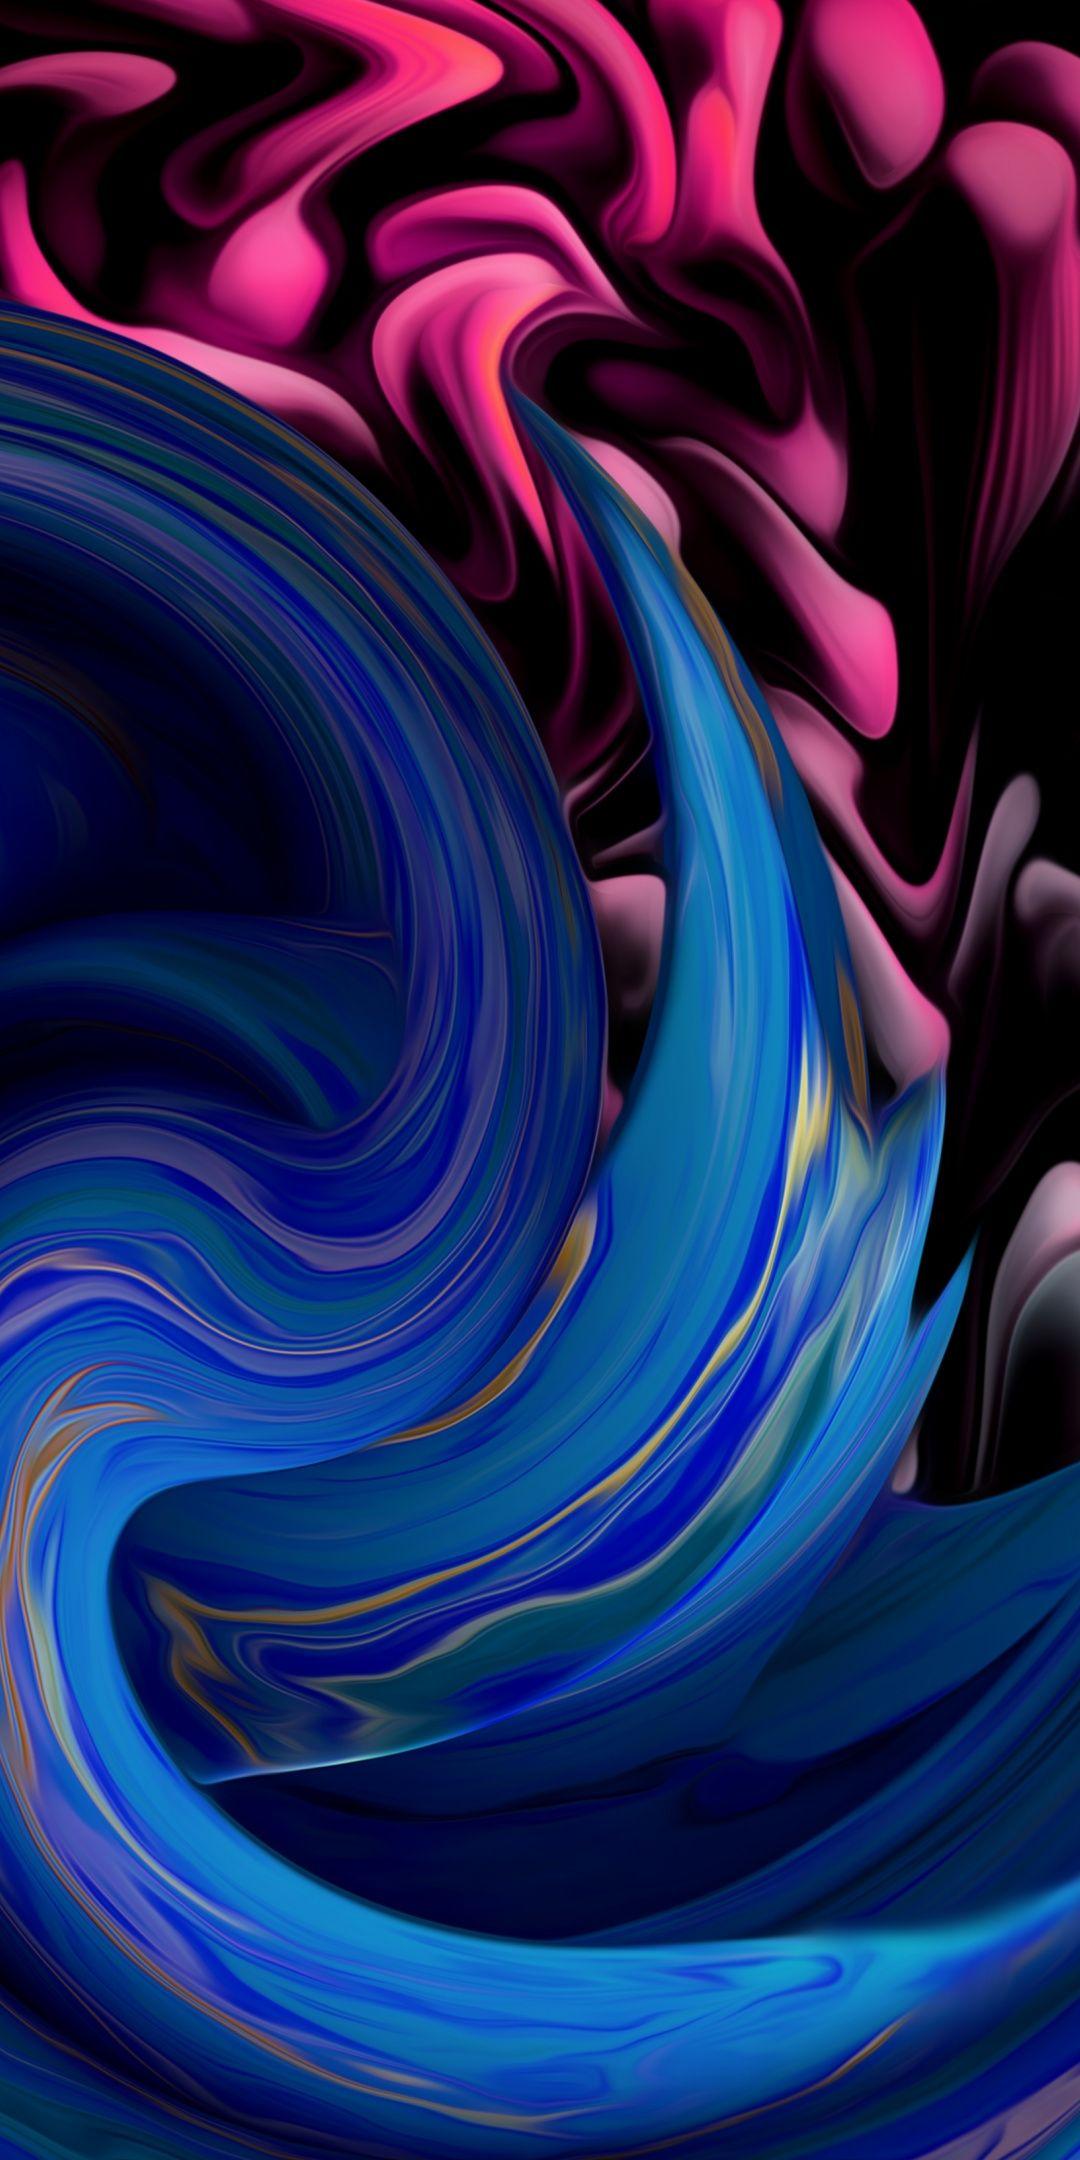 Curves, Fluid, Blue Pink, Abstract, 1080x2160 Wallpaper. Abstract Wallpaper, Abstract Iphone Wallpaper, Abstract Wallpaper Background